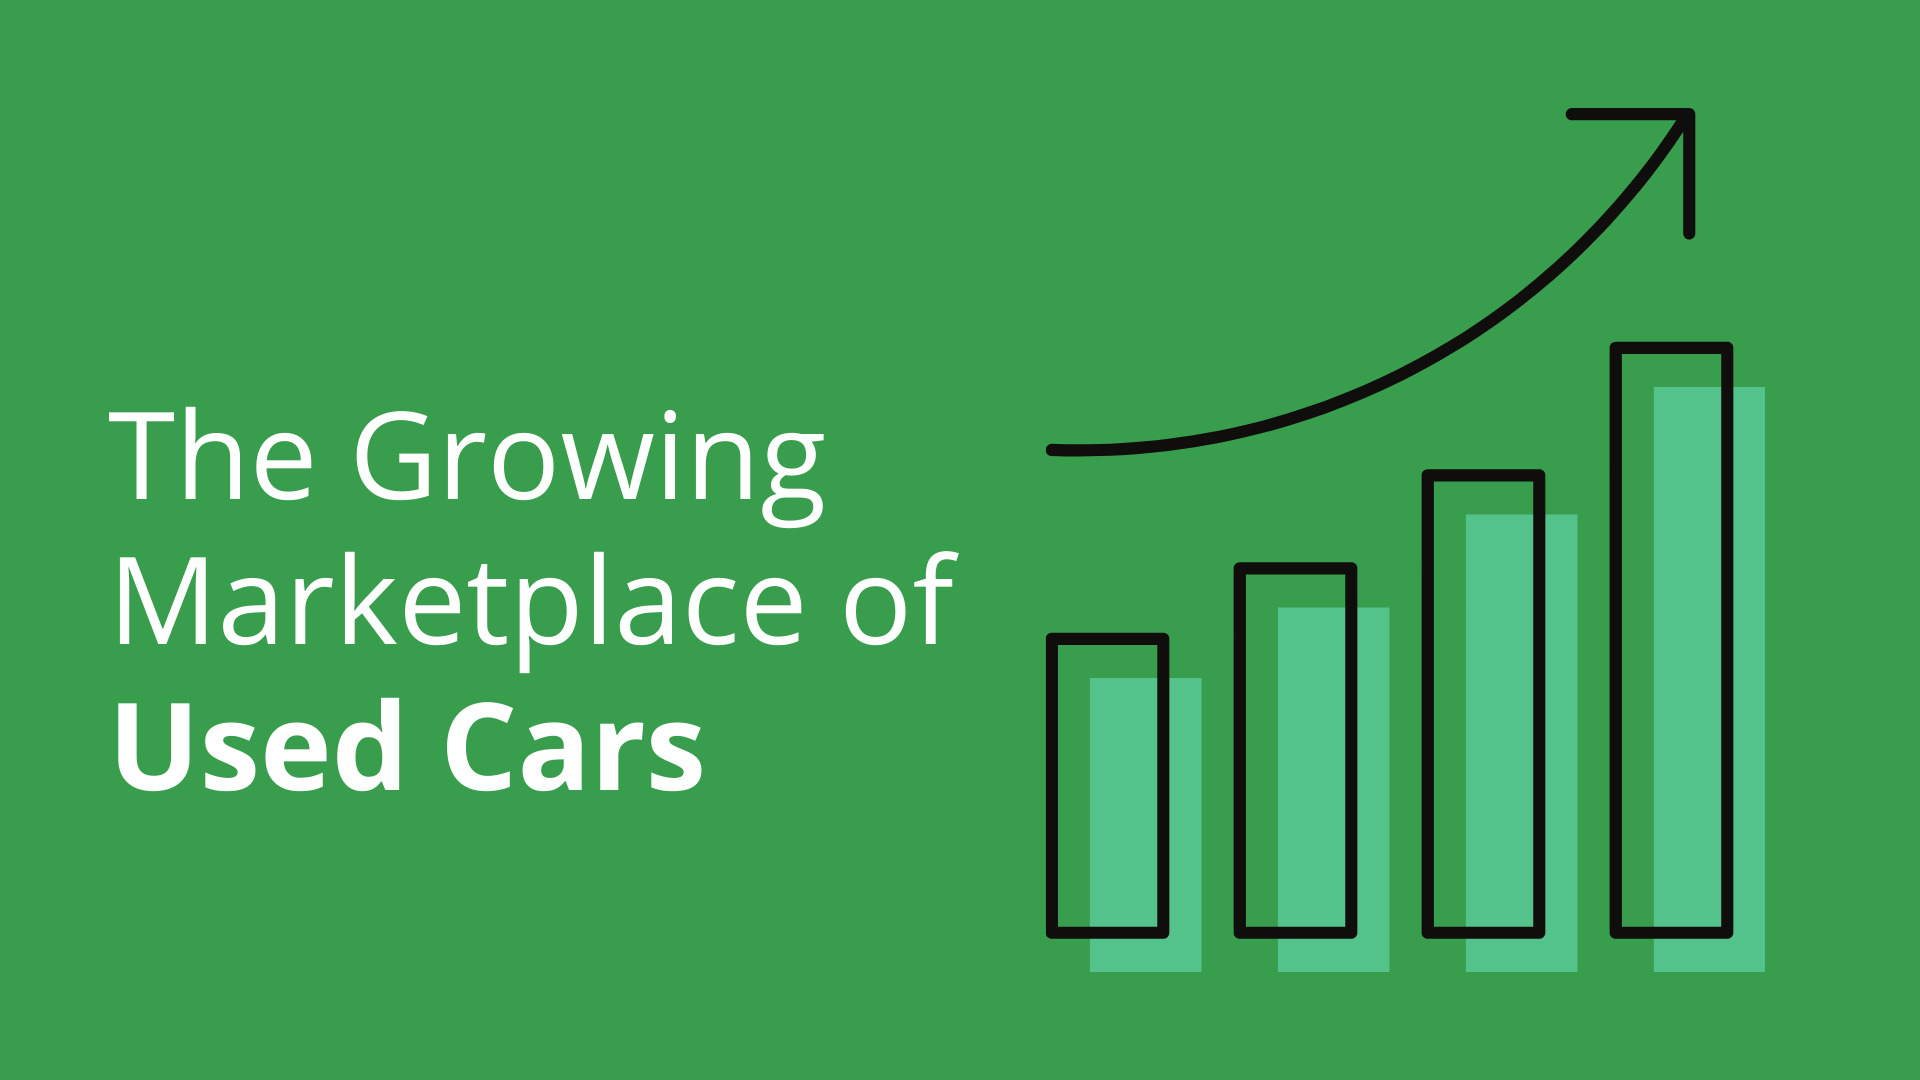 The Growing Marketplace of Used Cars